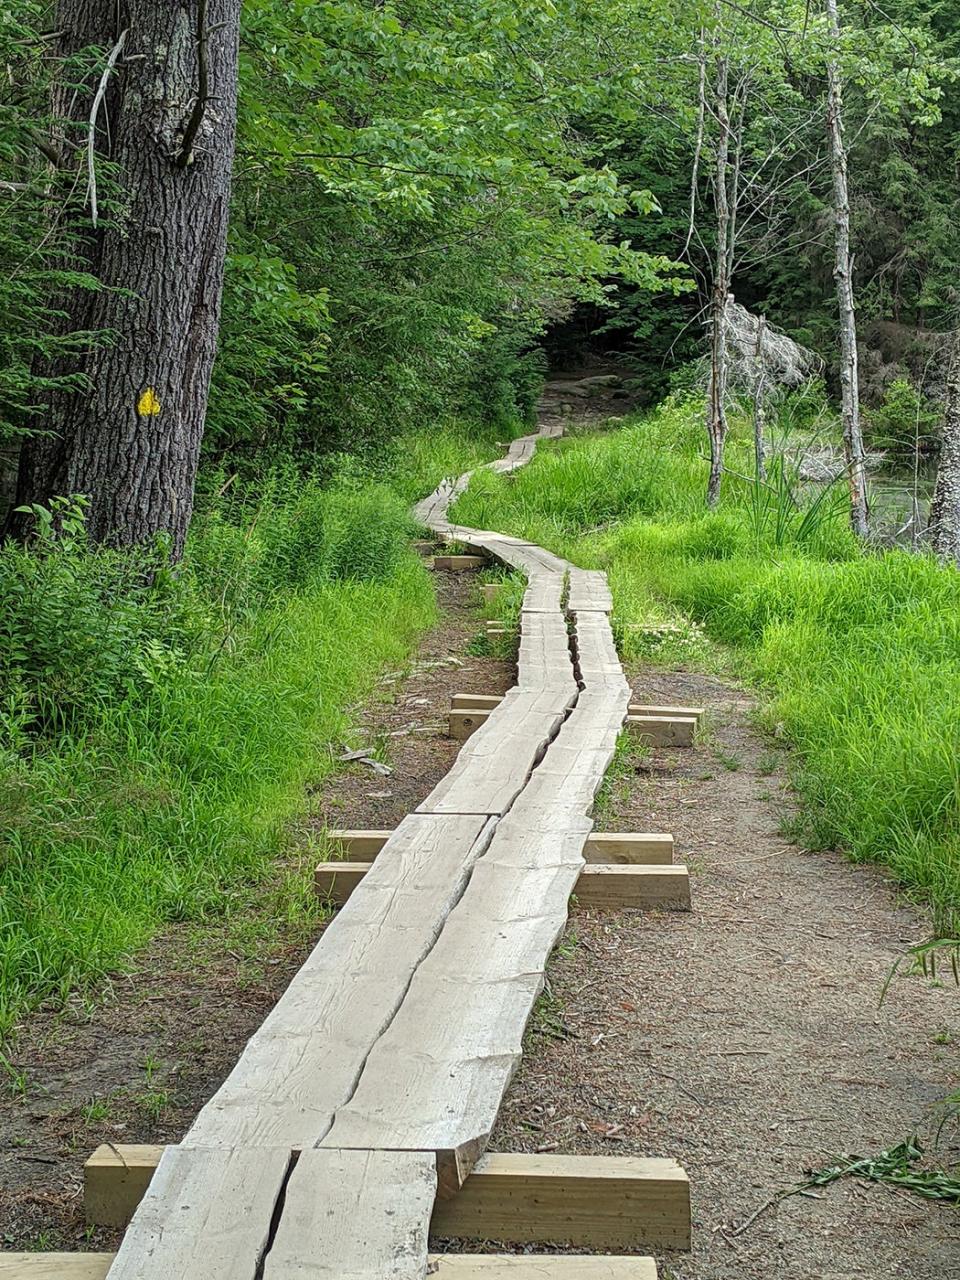 Wooden planks are in place to help hikers traverse the damper sections of the Wapack Trail on their way to the summit of Mt. Watatic in Ashburnham.